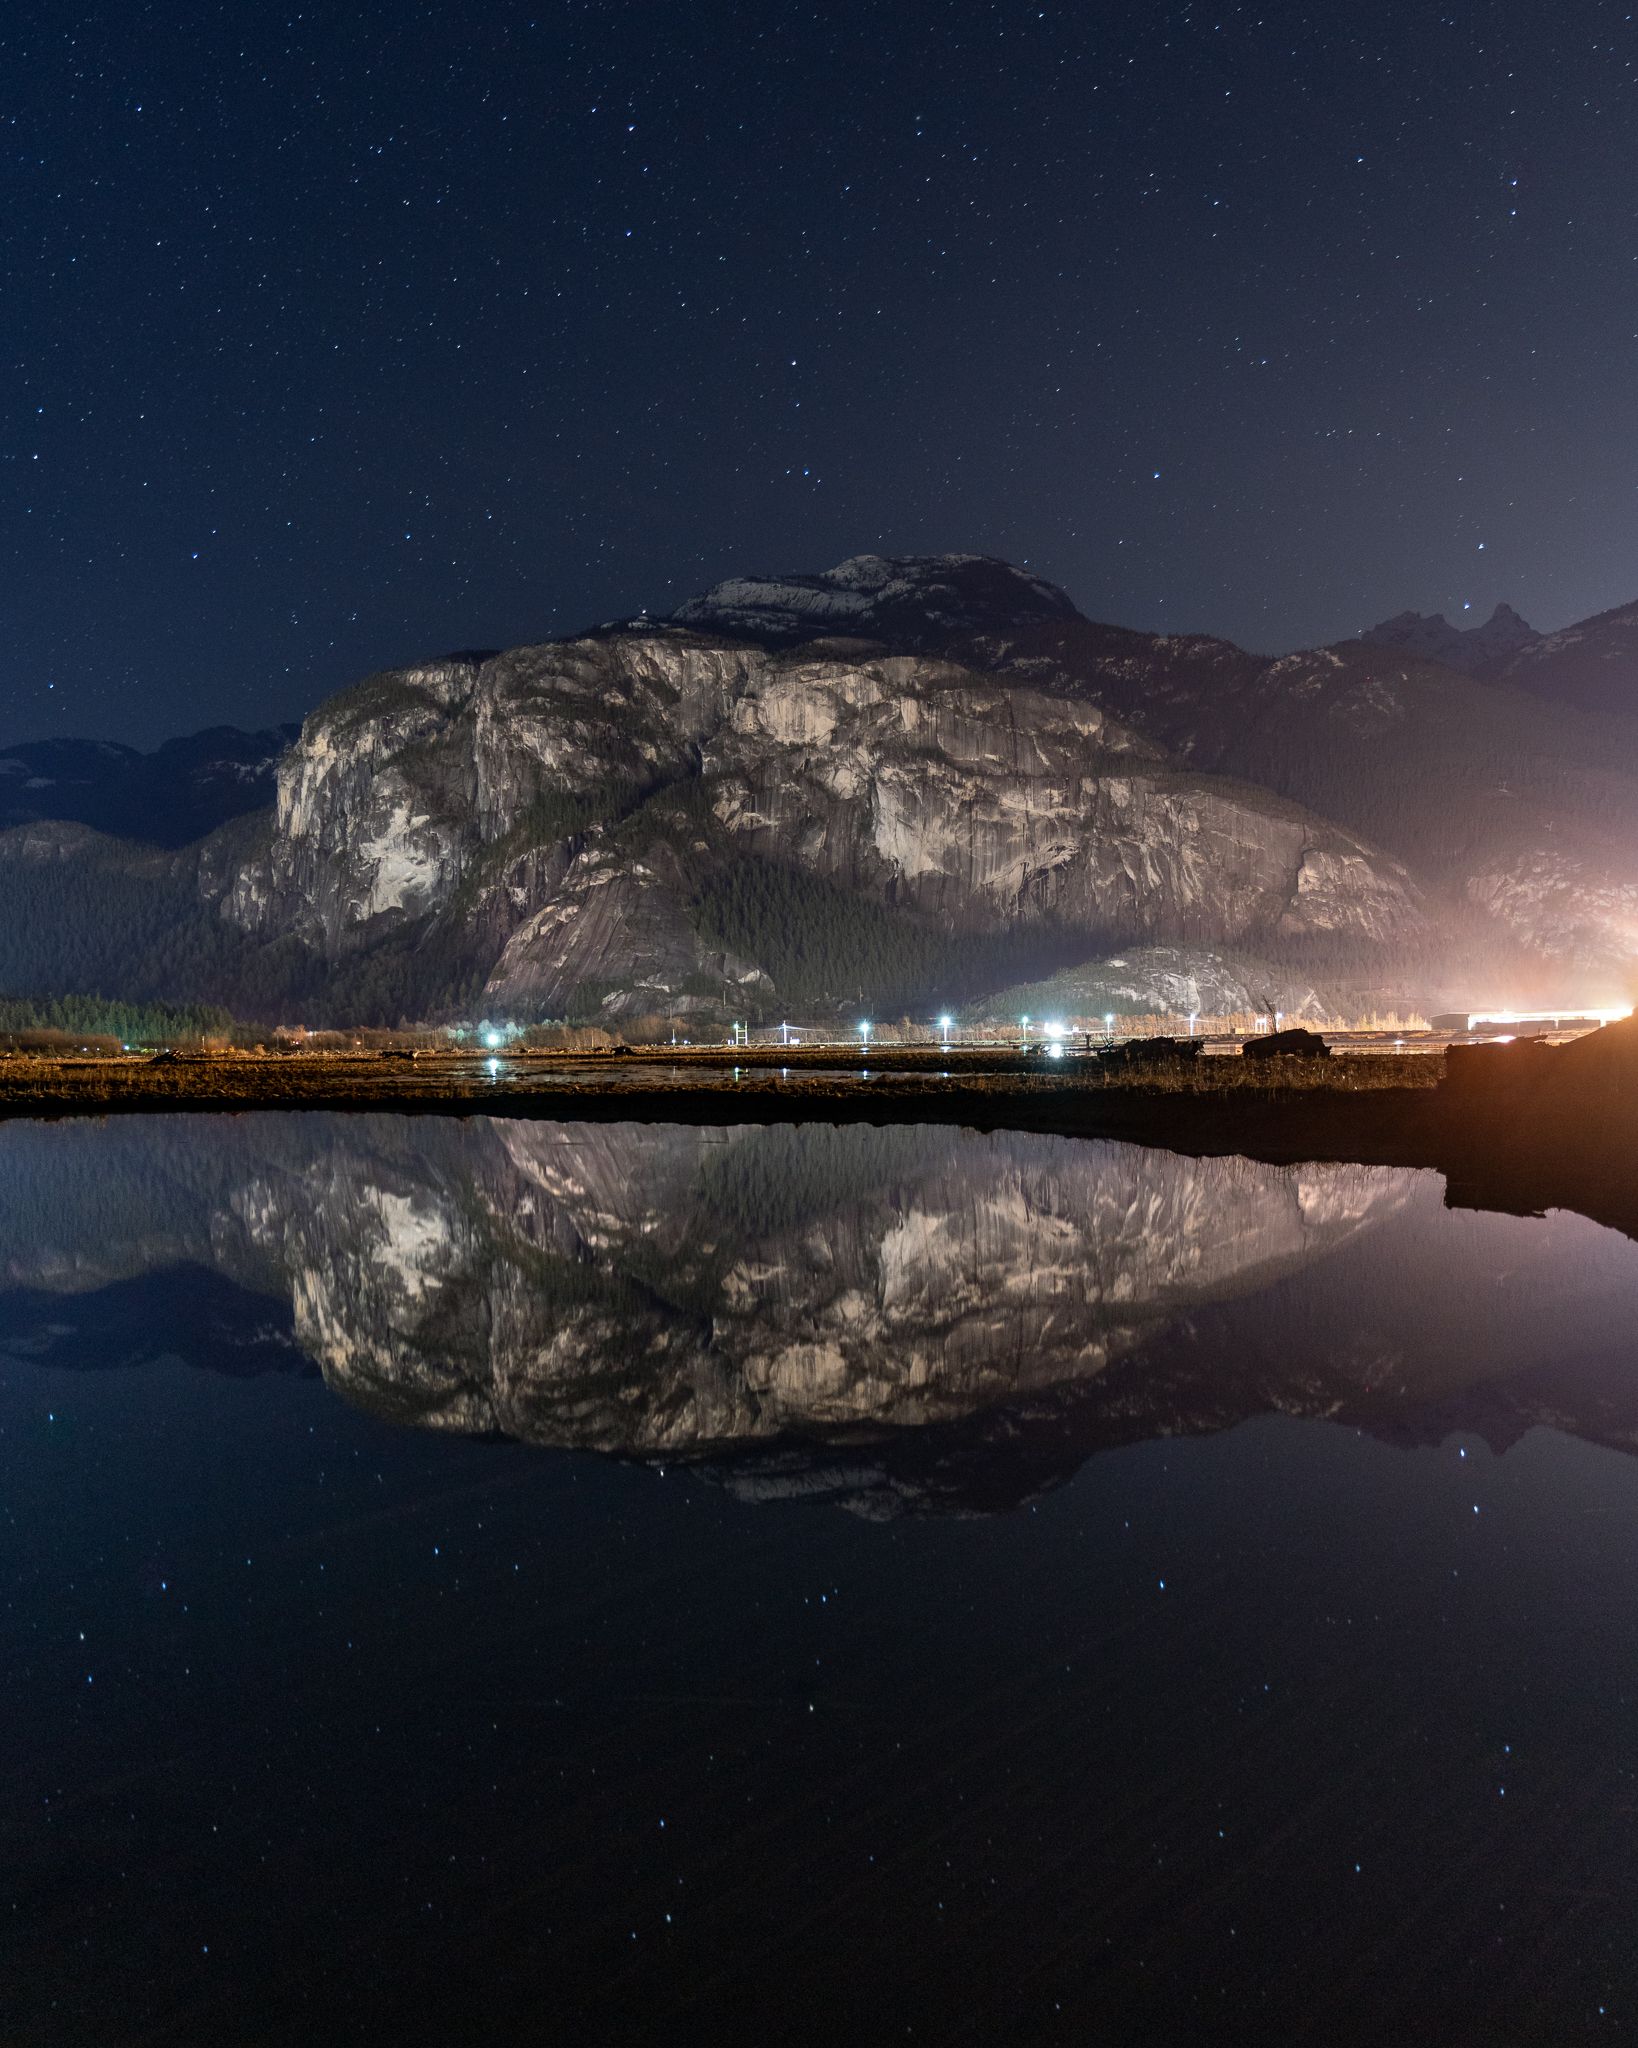 Starry night reflections in Squamish, BC